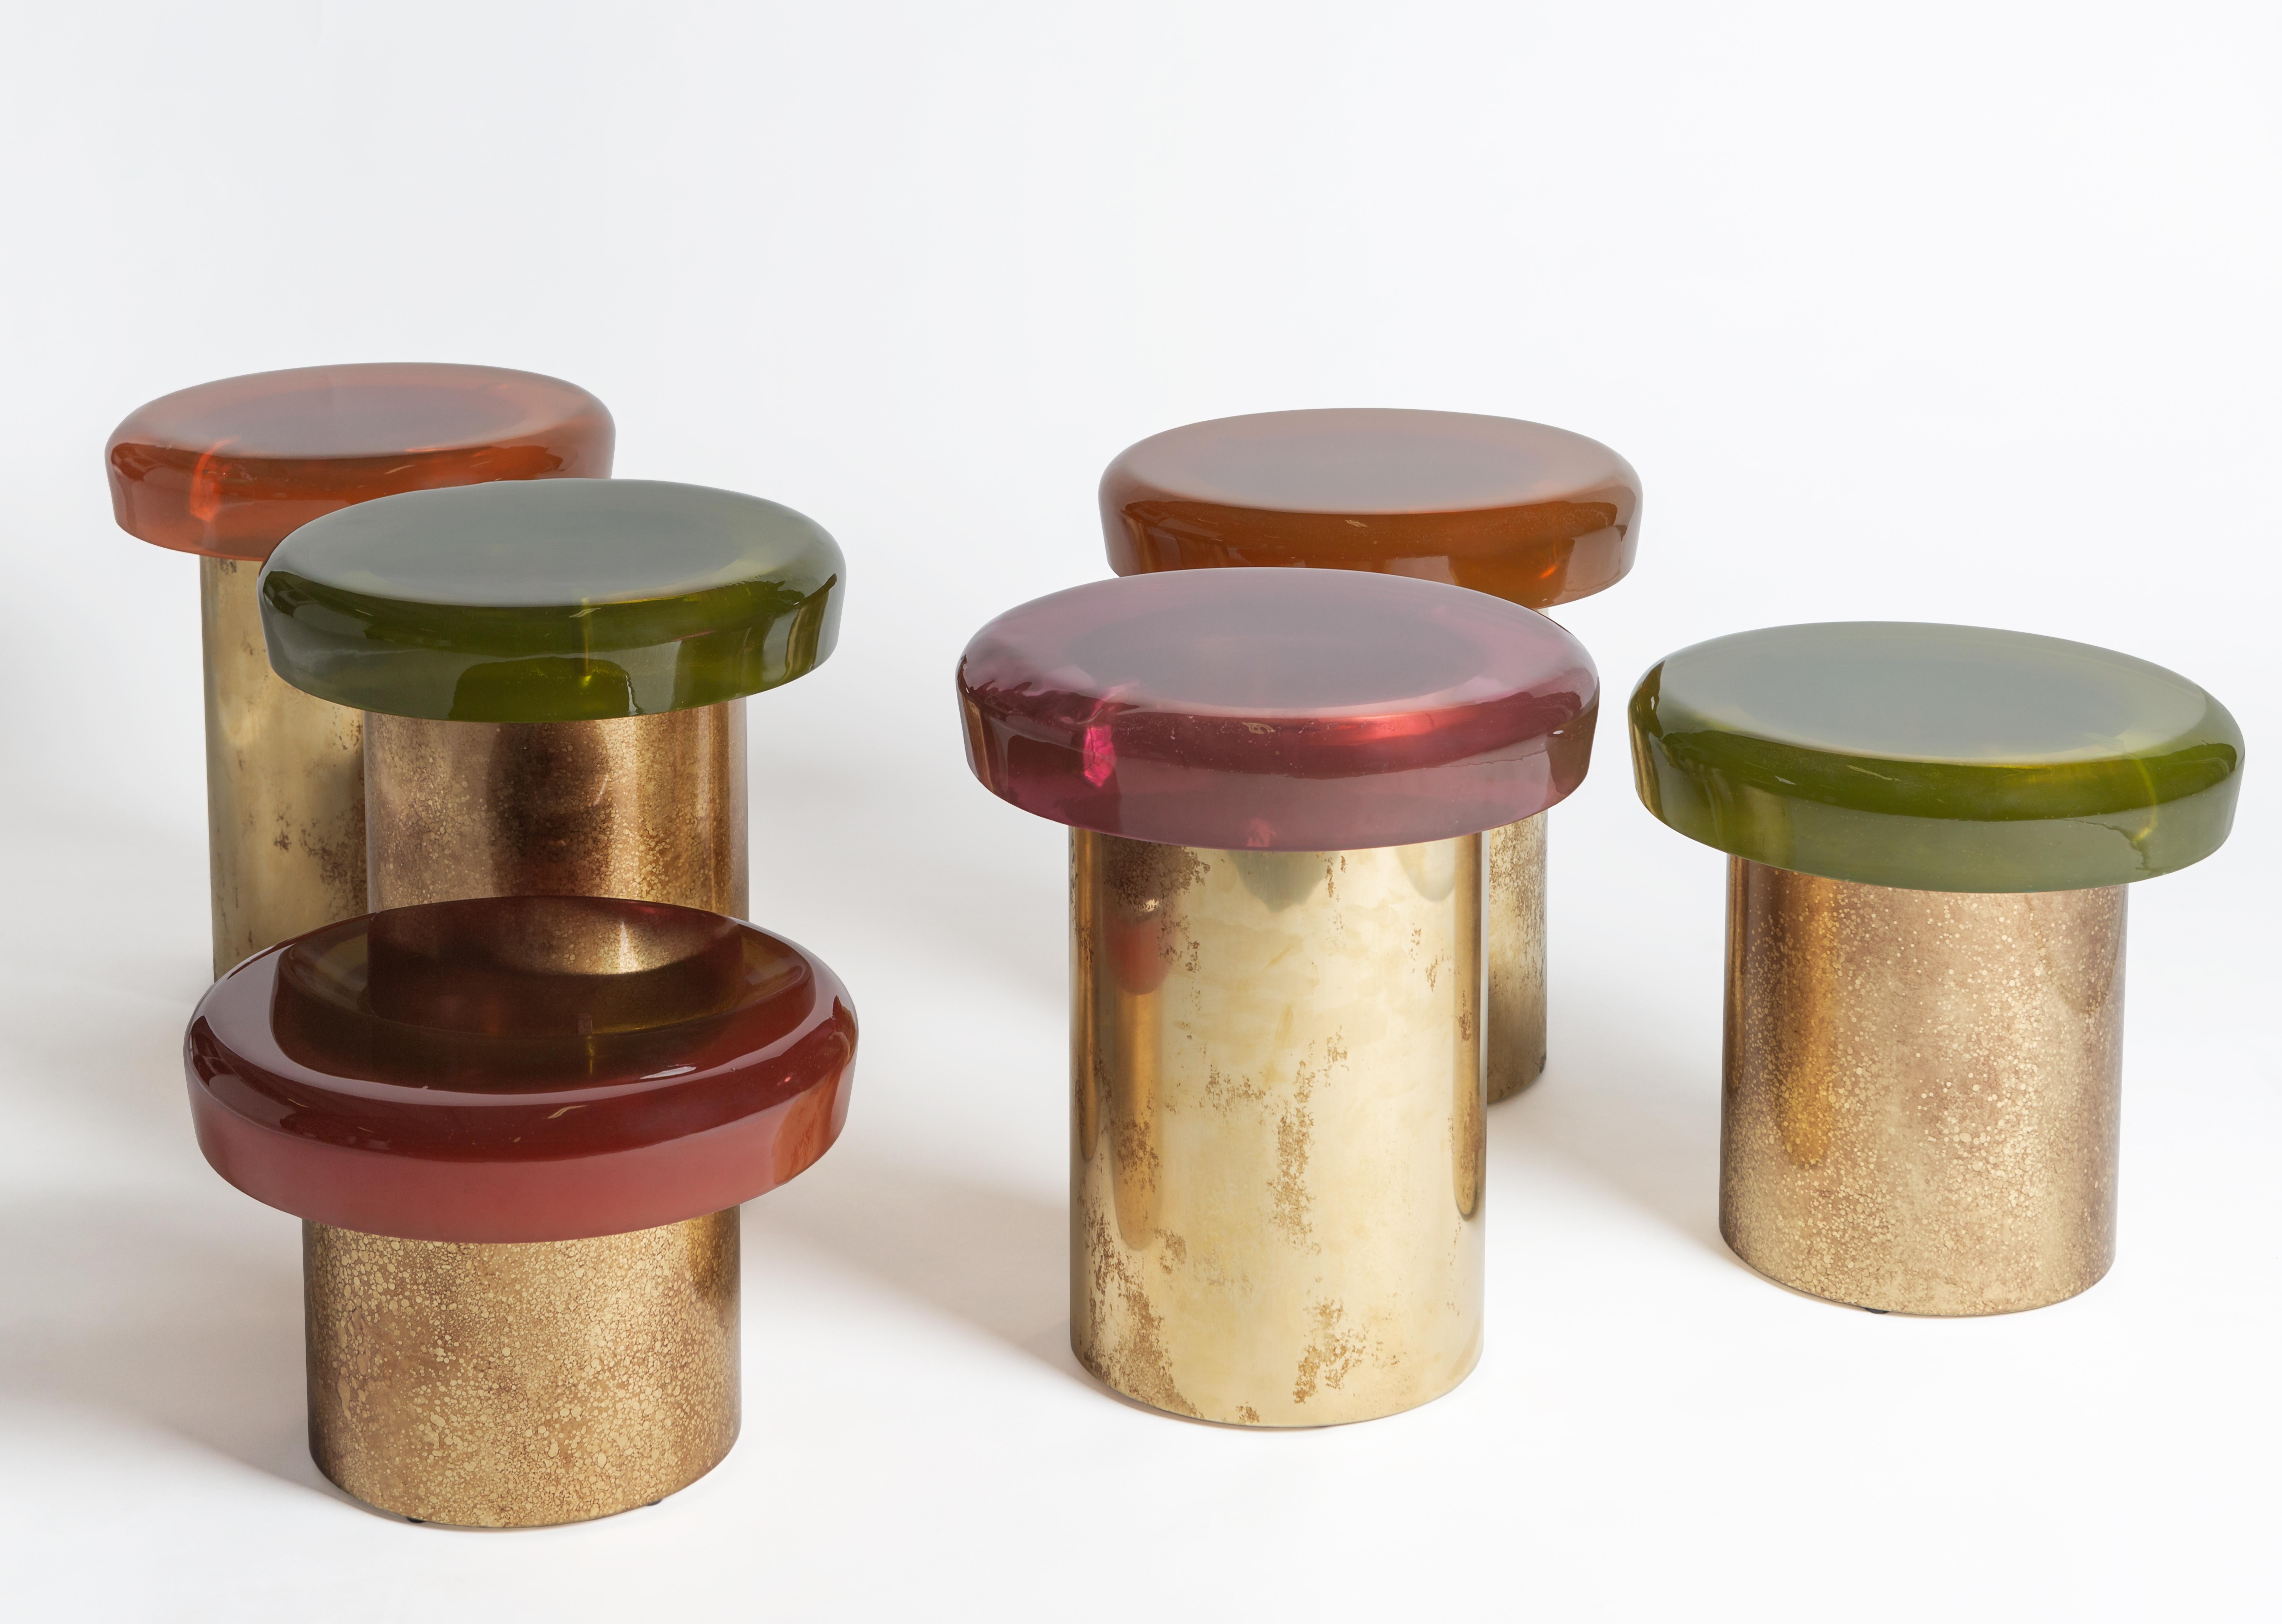 Golia Stool by Draga&Aurel Resin and Brass, 21st Century In New Condition For Sale In Como, IT